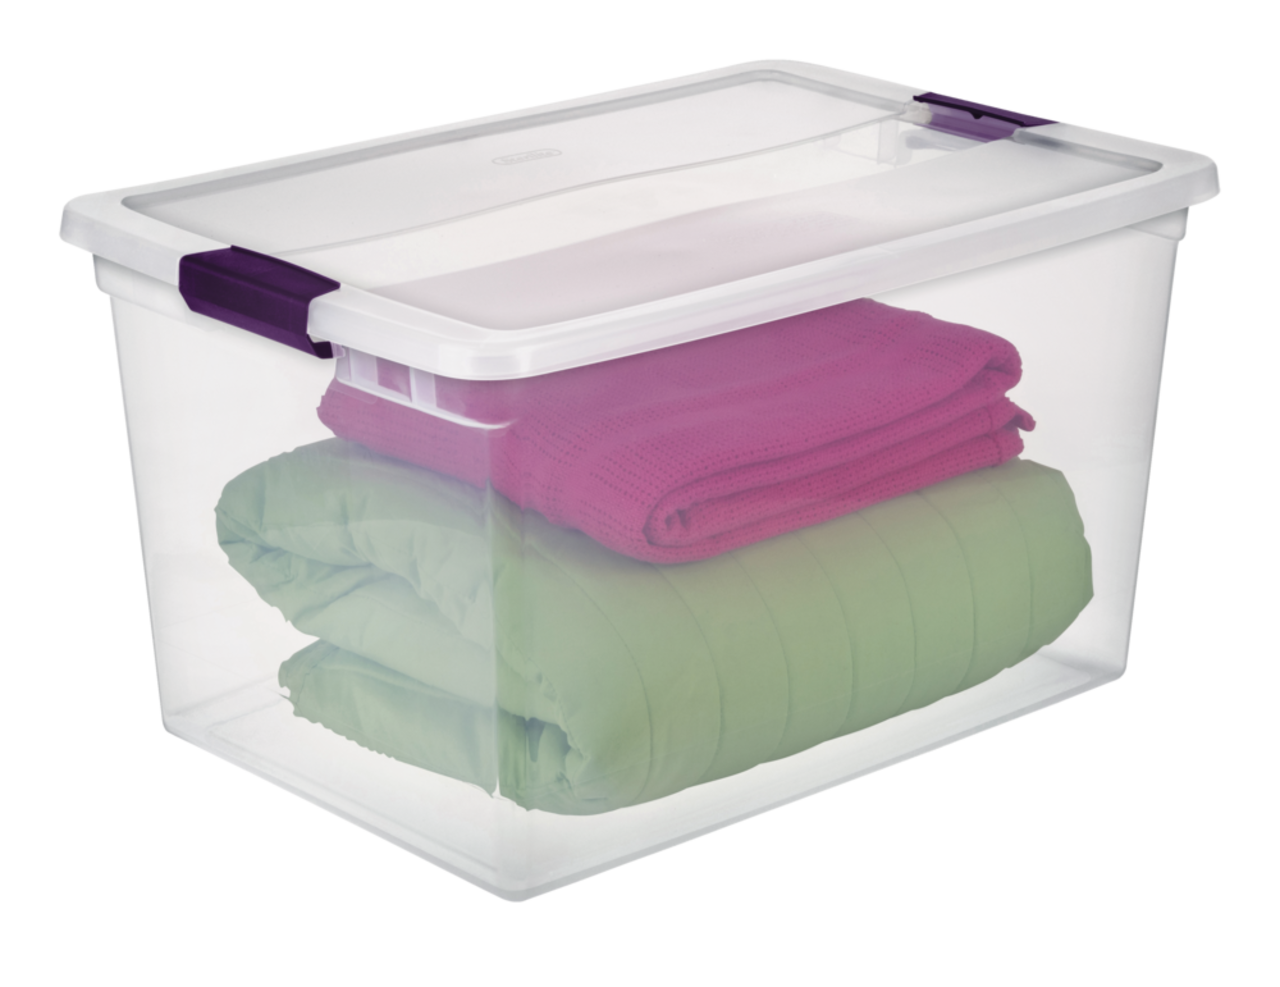 https://media-www.canadiantire.ca/product/living/home-organization/storage-containers/1426025/sterilite-clearview-tote-with-latch-62l-8264336f-f25c-4fe3-9deb-b7947ff5dbbb.png?imdensity=1&imwidth=640&impolicy=mZoom